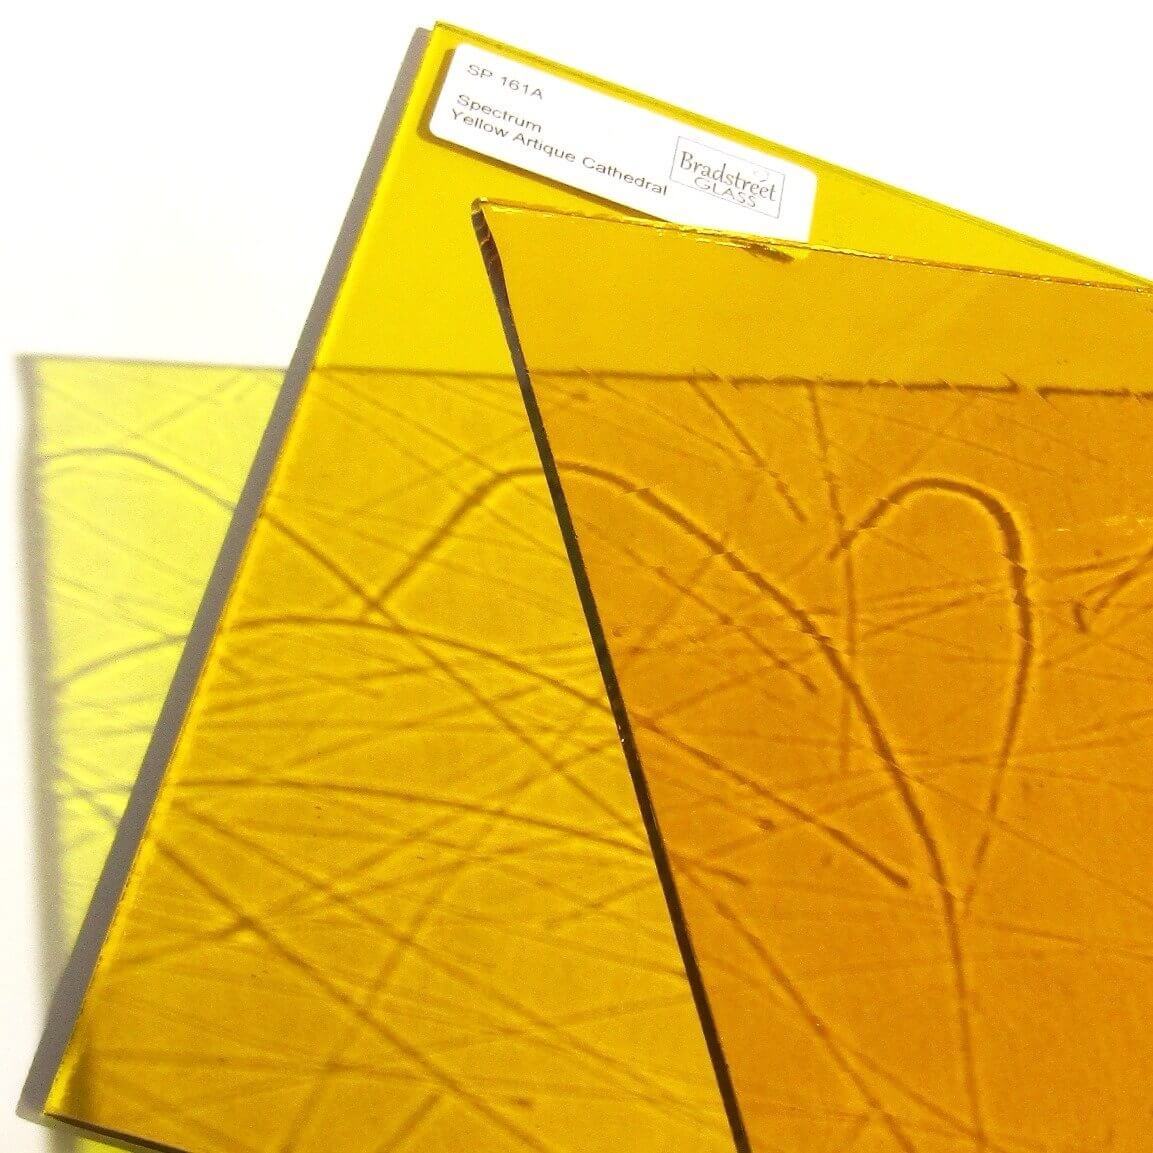 Spectrum 161A Artique Textured Cathedral Stained Glass Sheet Yellow Translucent